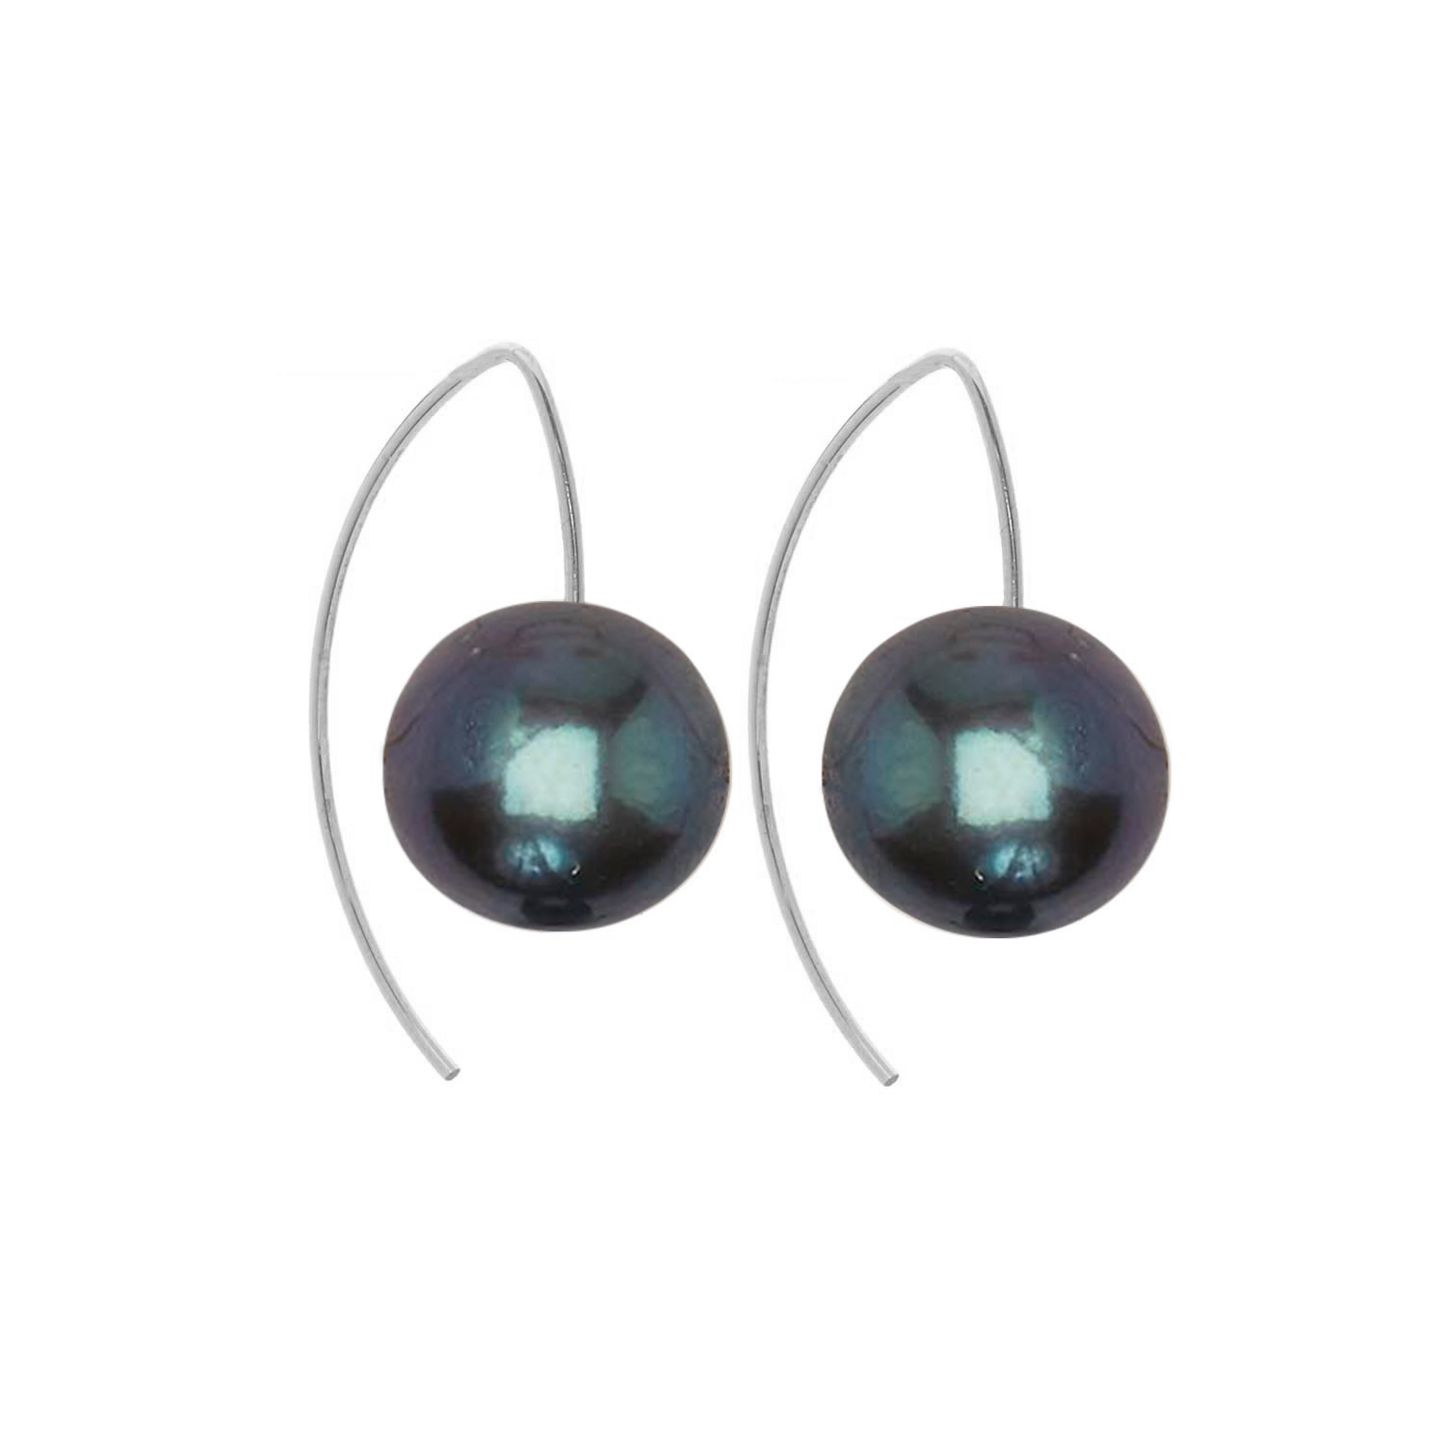 Lobe Huggers Signature Short Curve Earrings with Large Round Freshwater Pearls (12mm)